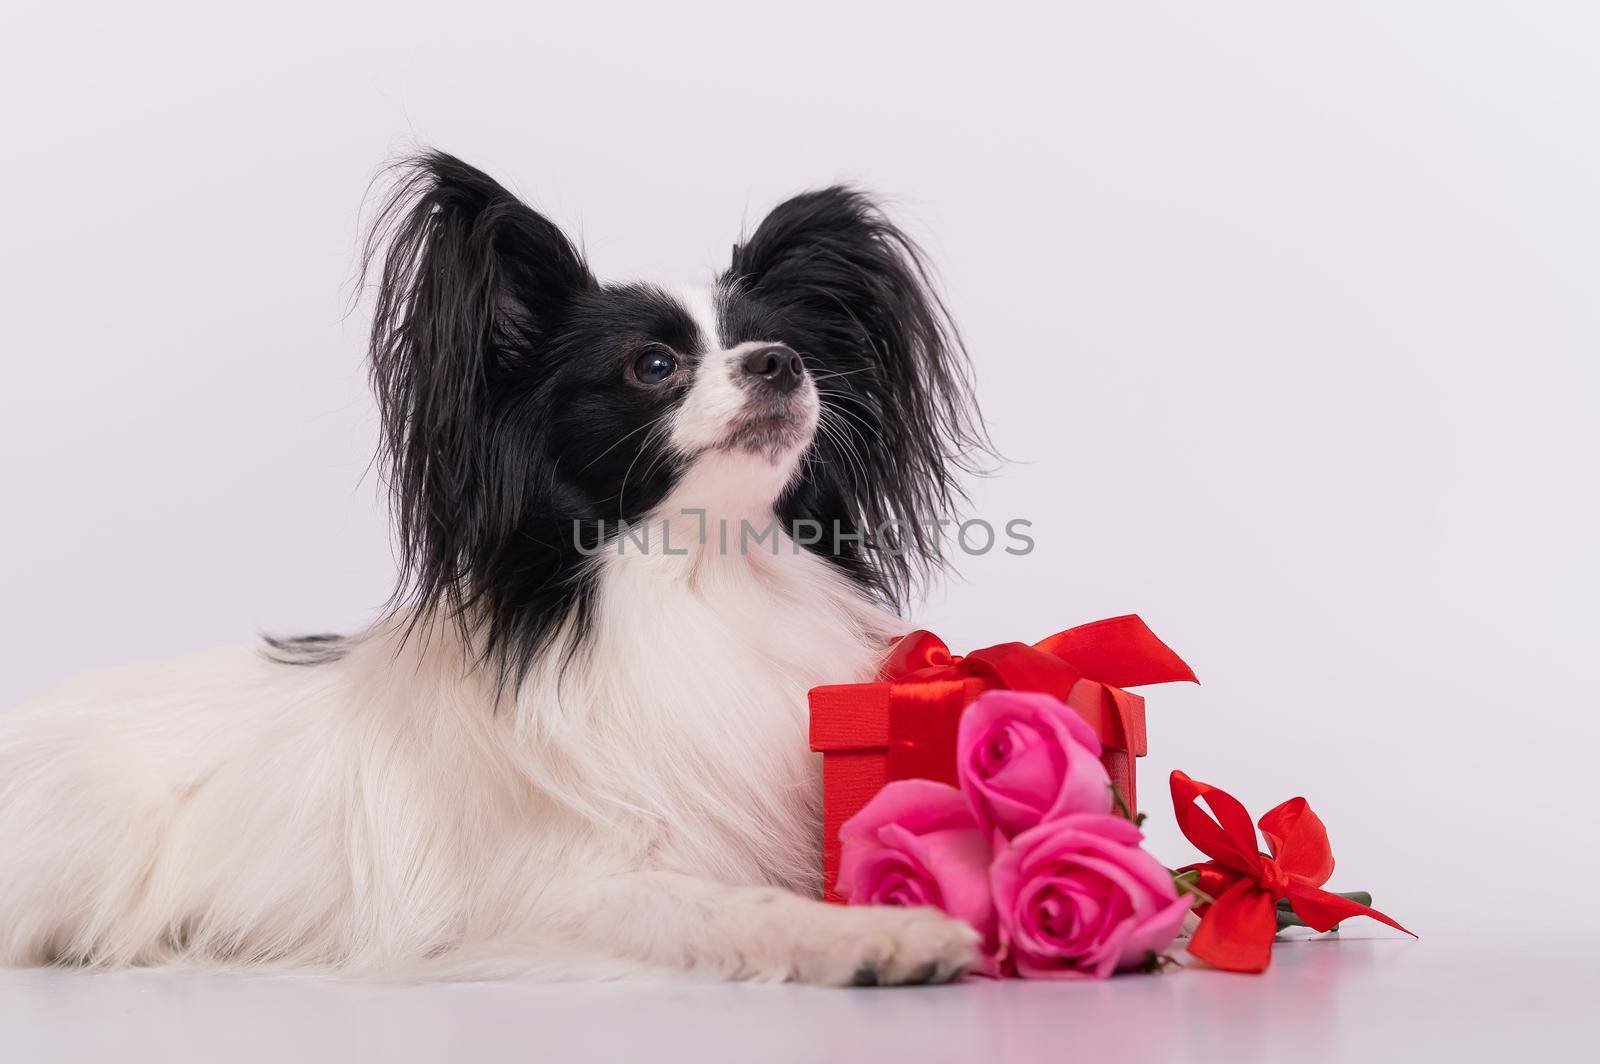 Portrait of a cute eared dog of the Papillon breed with a gift and a bouquet of roses for Valentine's Day. A romantic continental spaniel on a date.